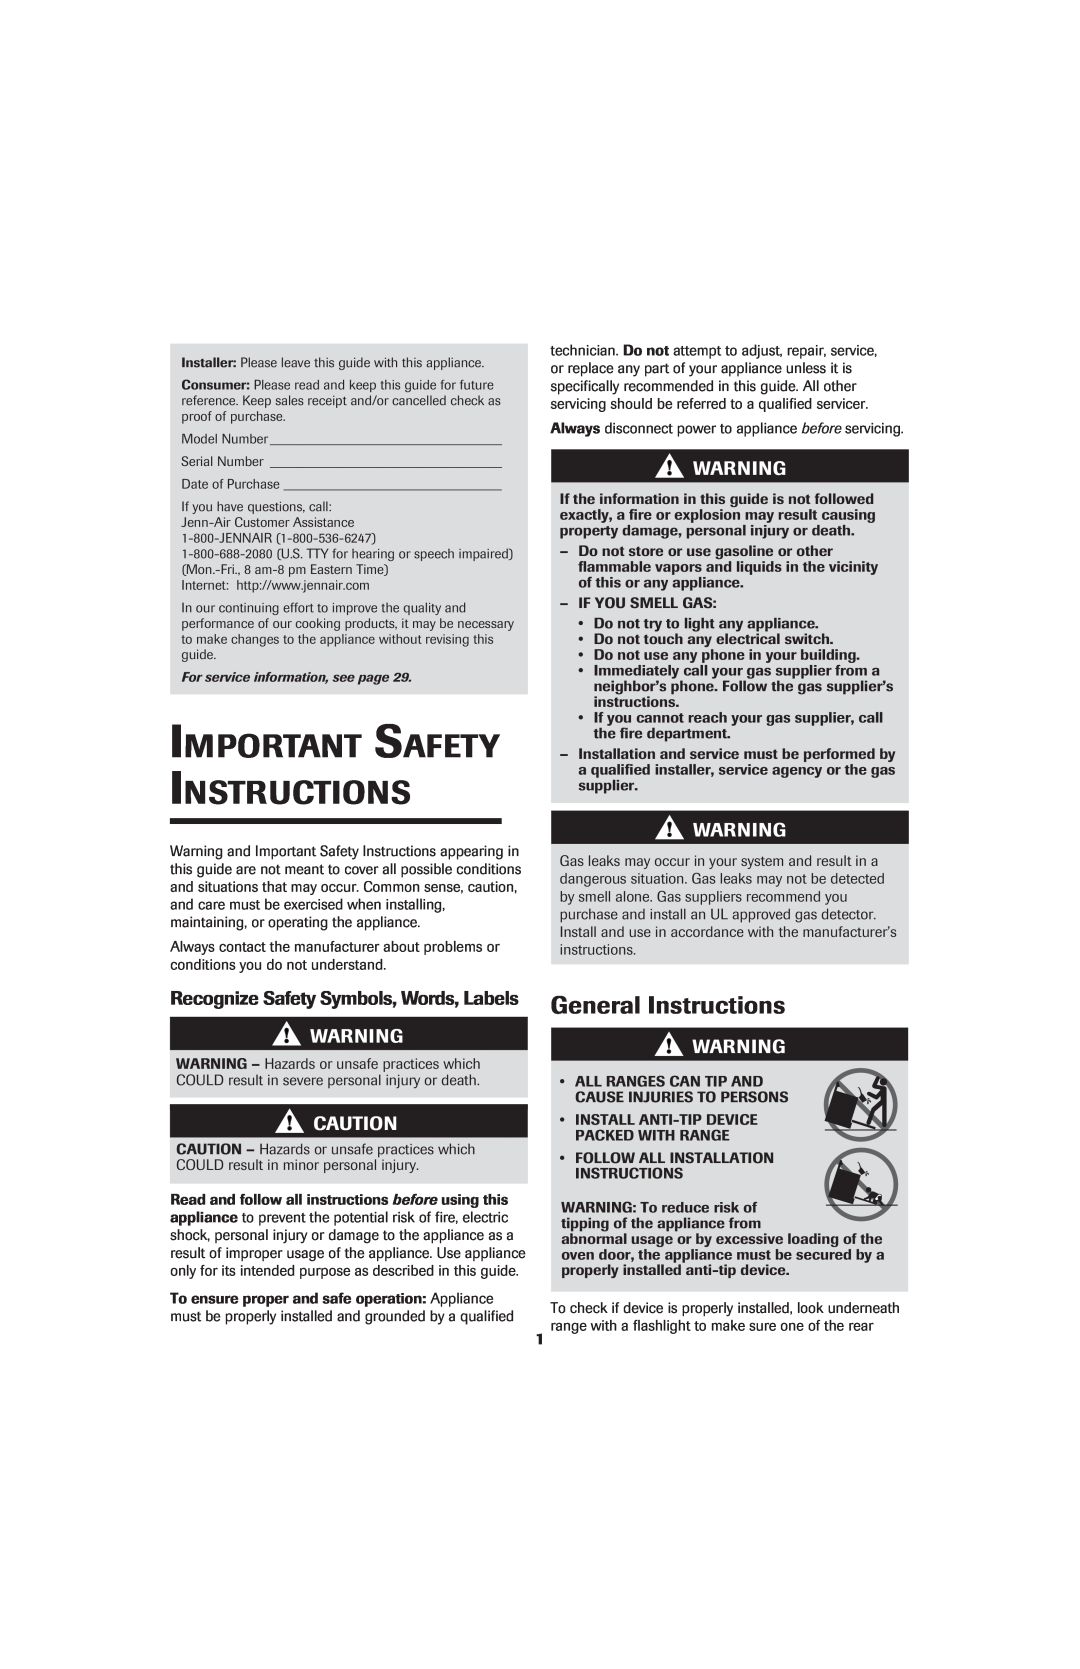 Jenn-Air 8113P757-60 General Instructions, Recognize Safety Symbols, Words, Labels, Important Safety Instructions 